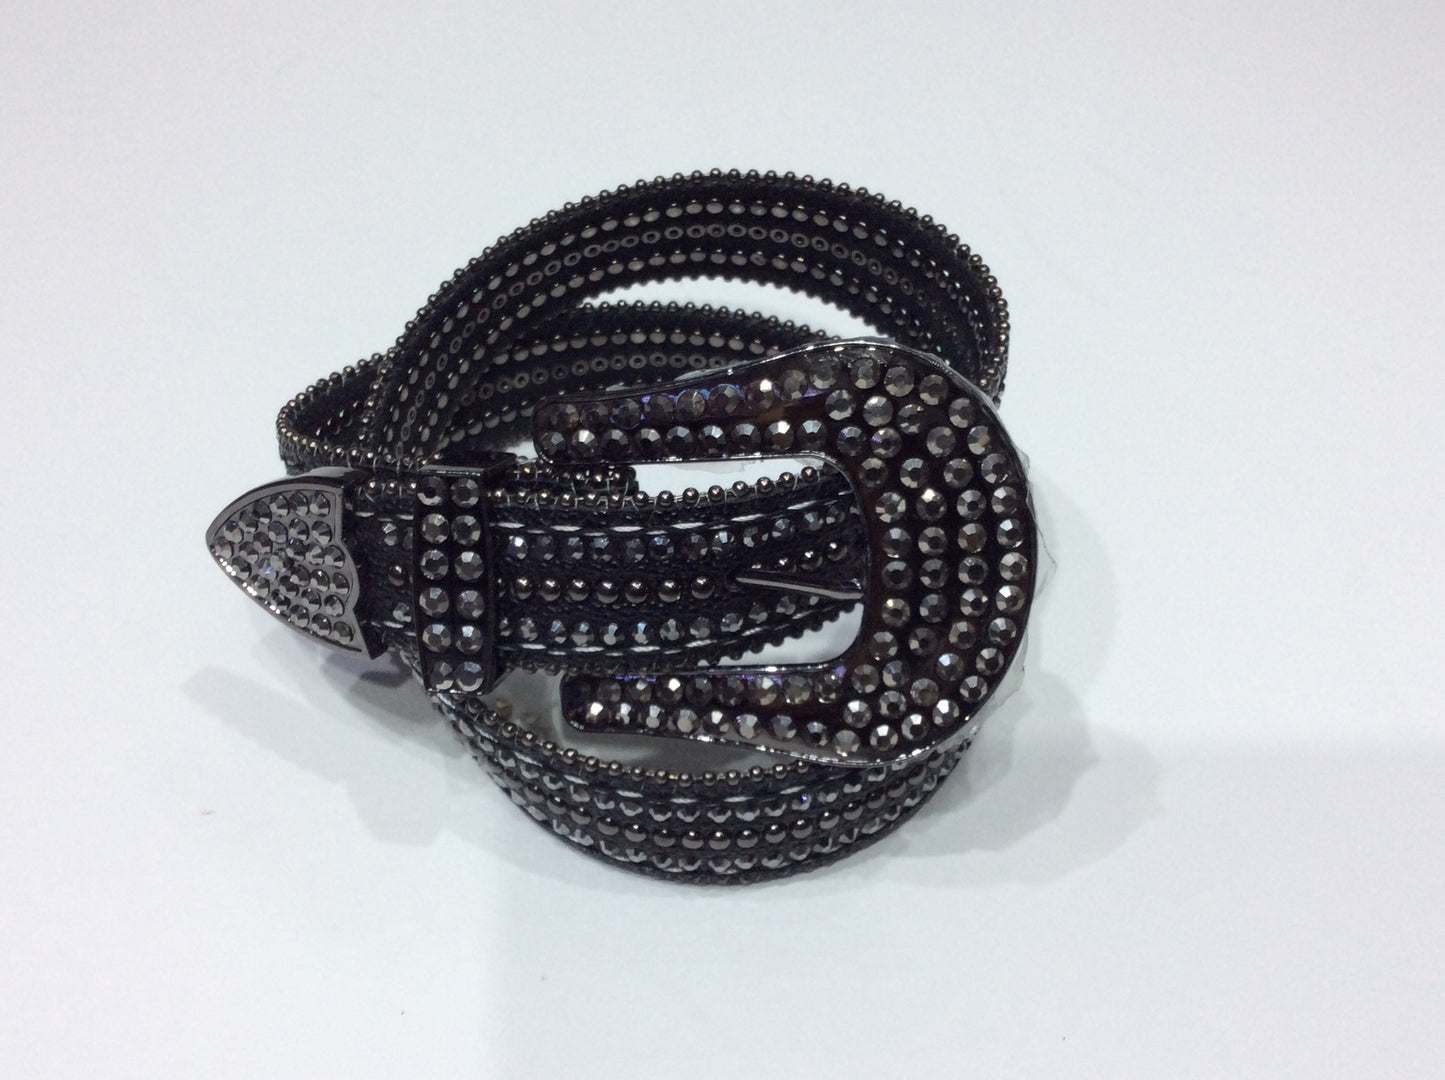 Belts-Wide Leather Belt with Crystal, Bead and Stud Embellishment